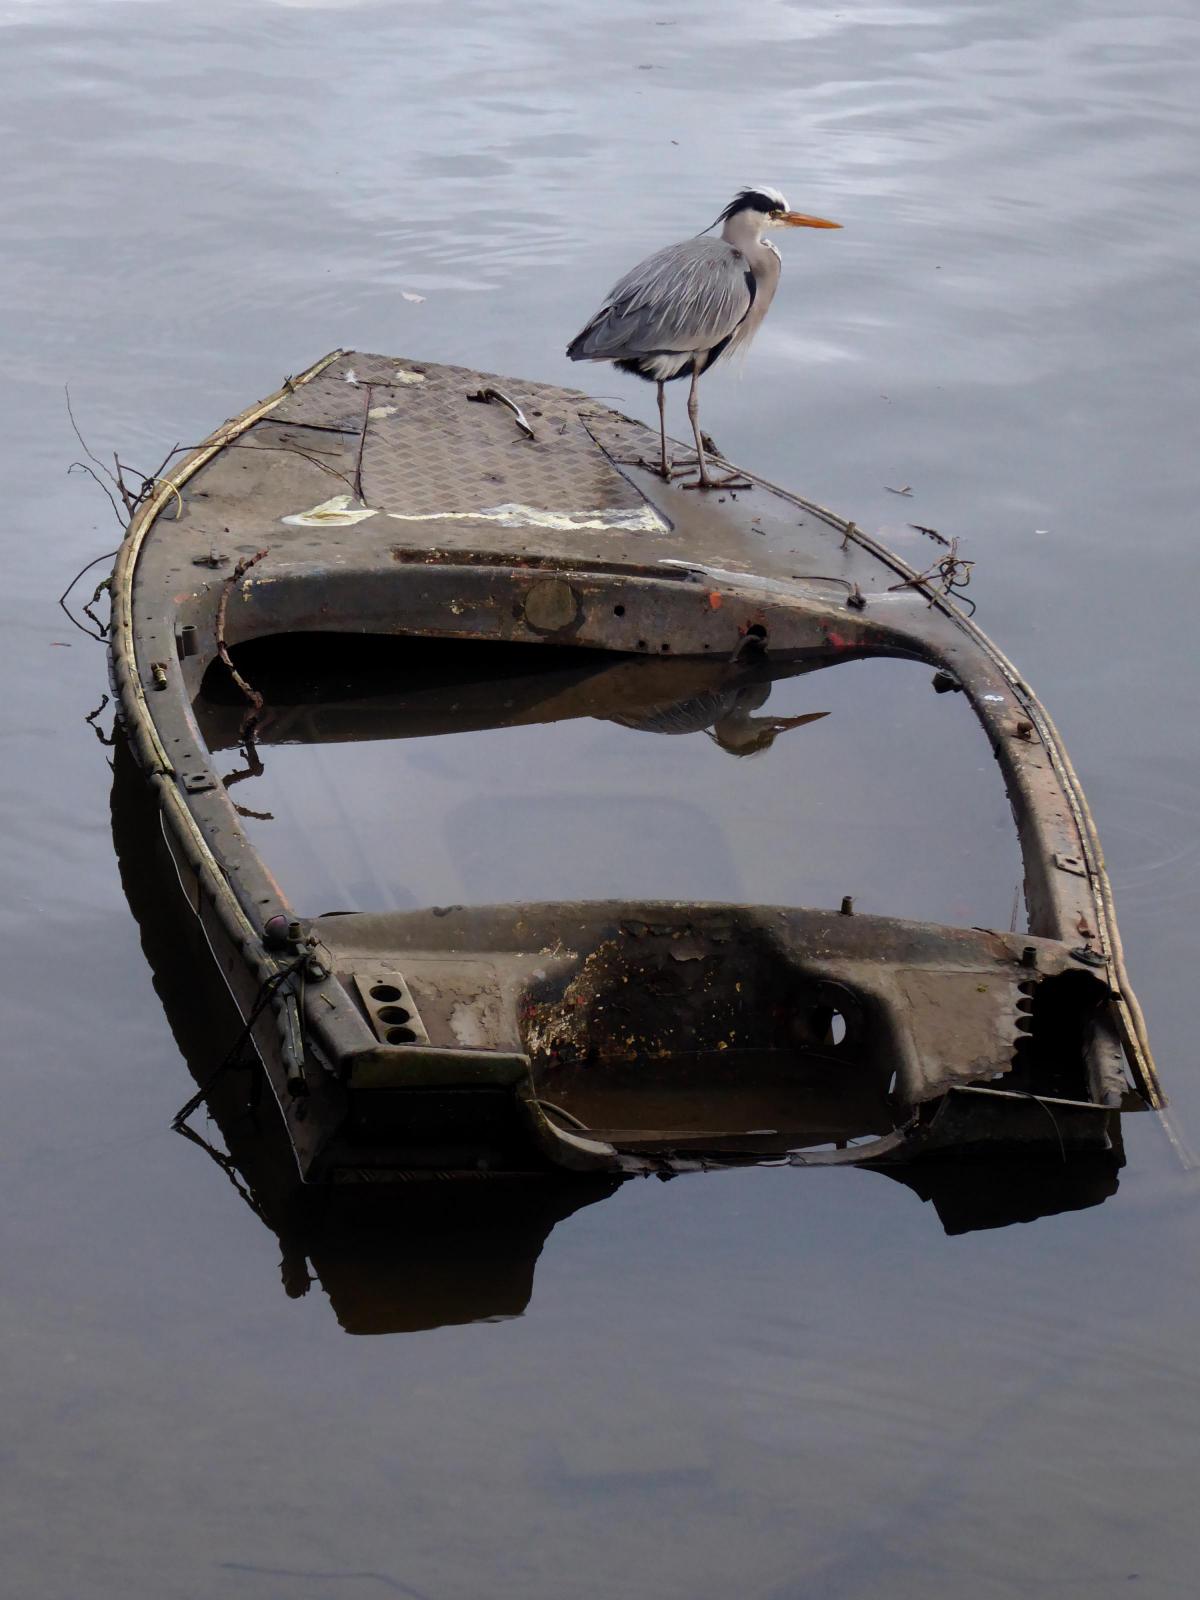 Verna Evans spotted this heron on board a half-sunken boat looking like he may just jump ship.